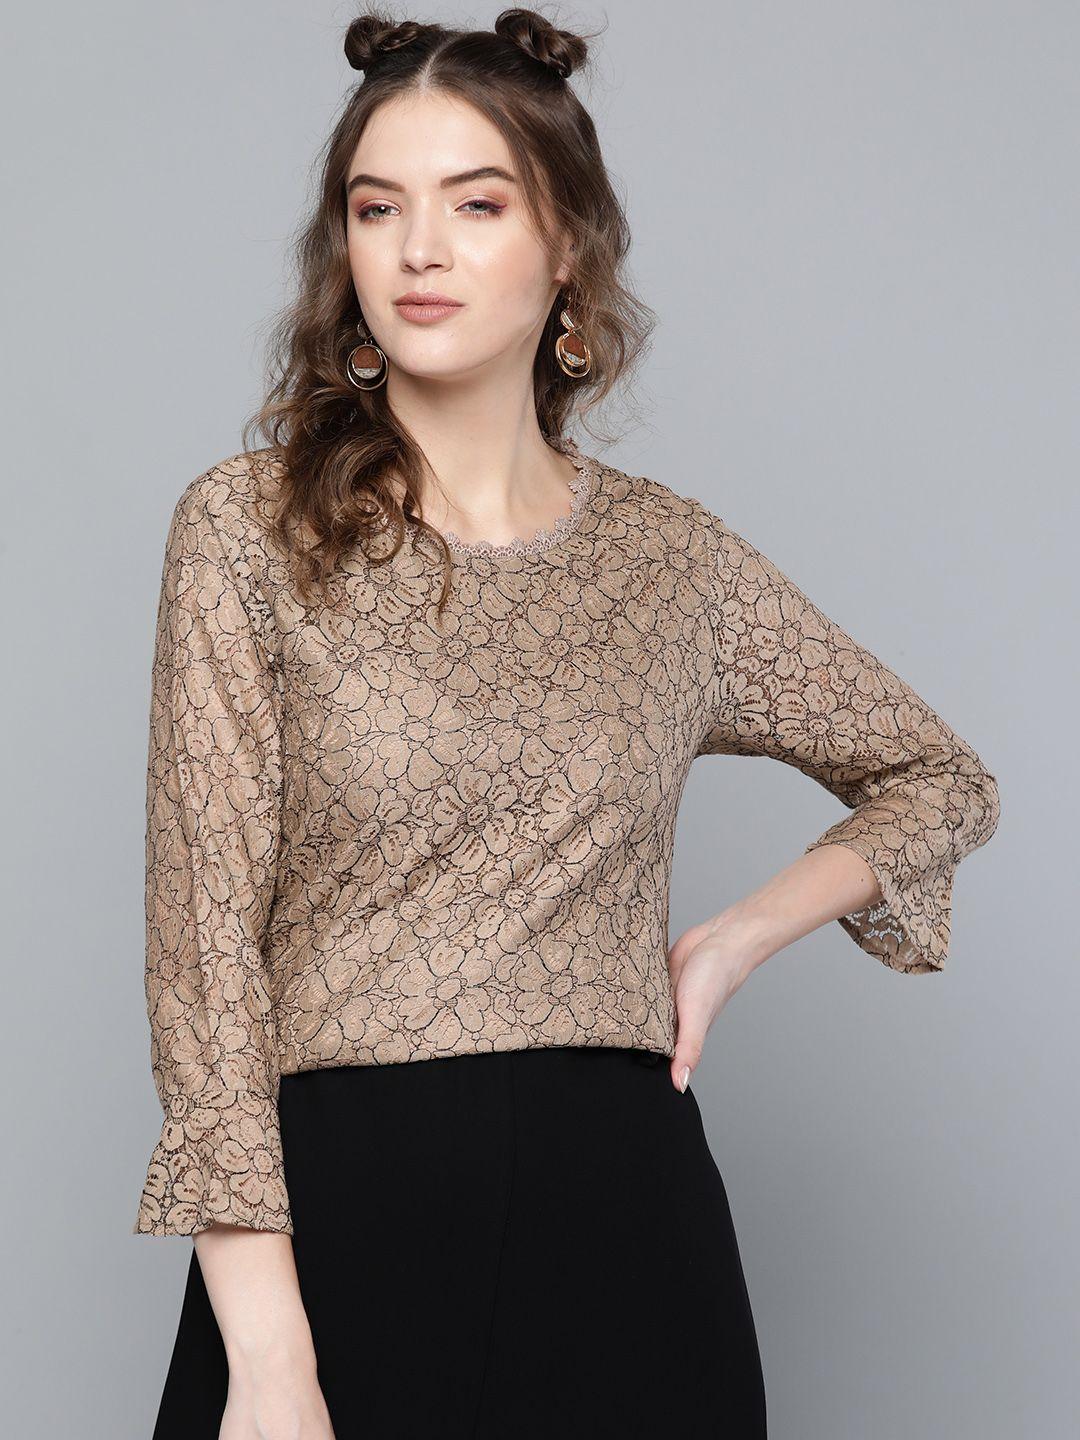 sassafras taupe & black floral printed bell sleeve lace top